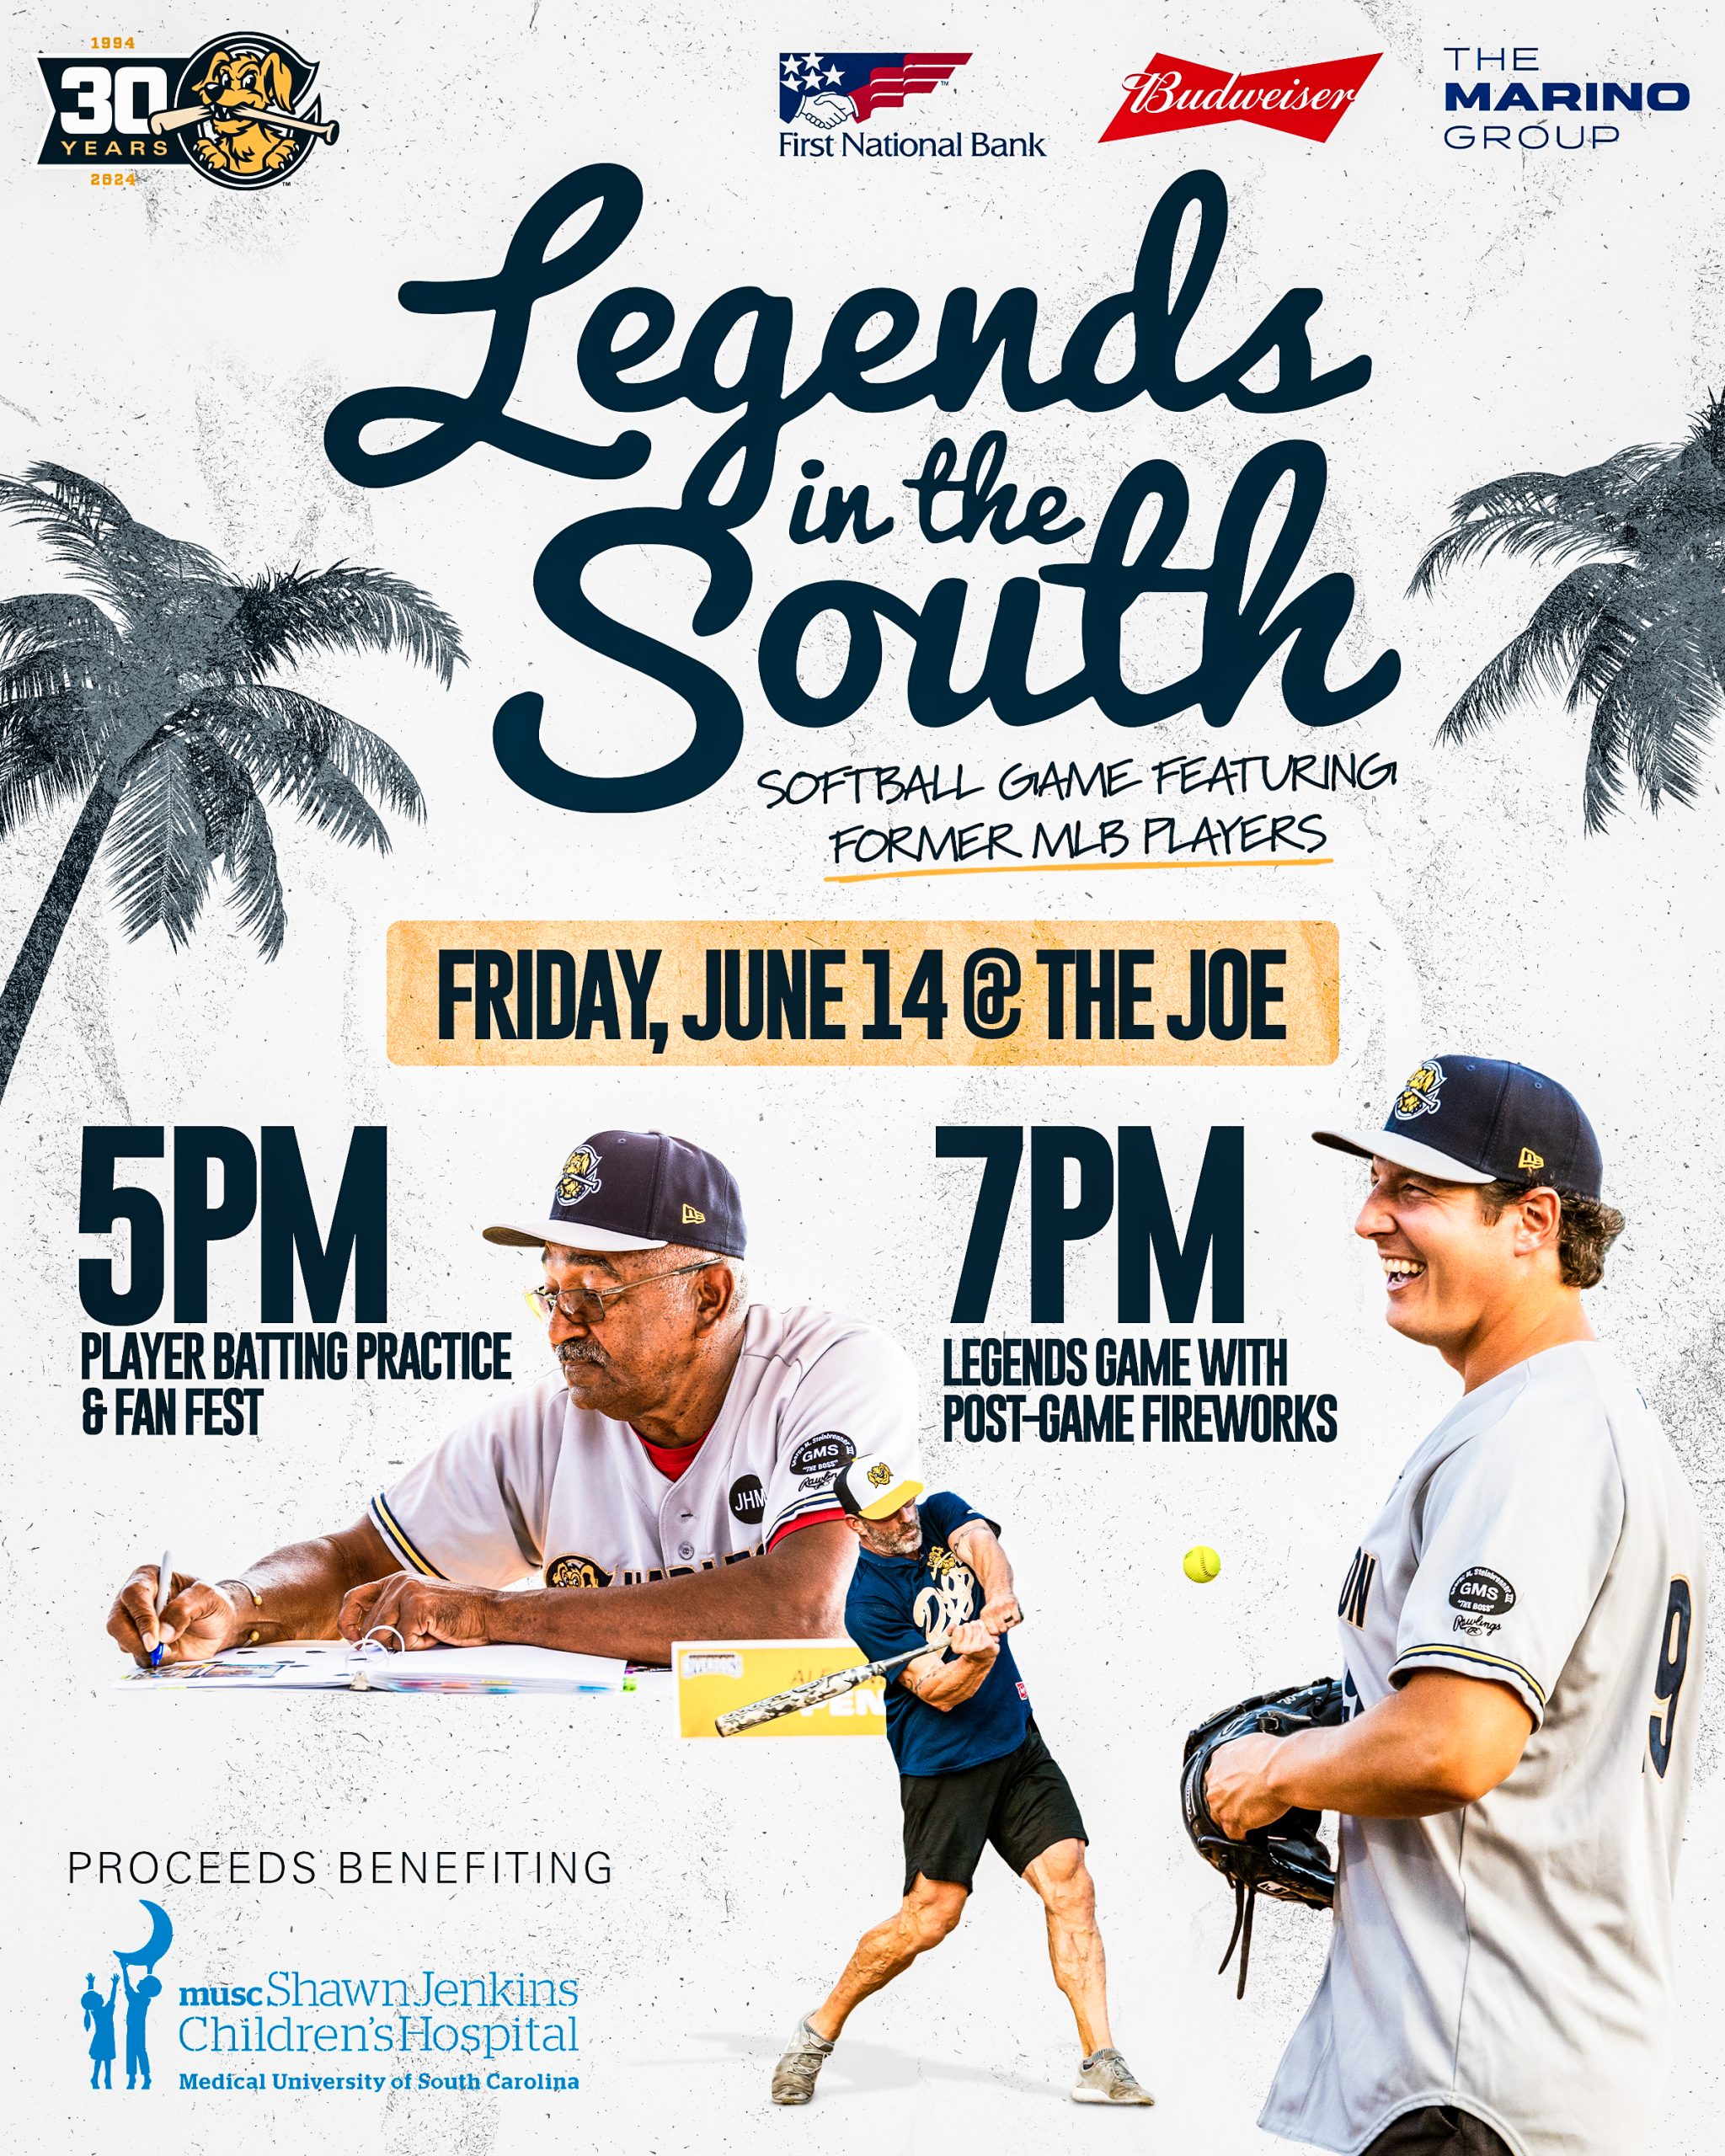 Flyer/Poster - Legends in the South softwall event at the Joseph R. Riley Park in Charleston, SC